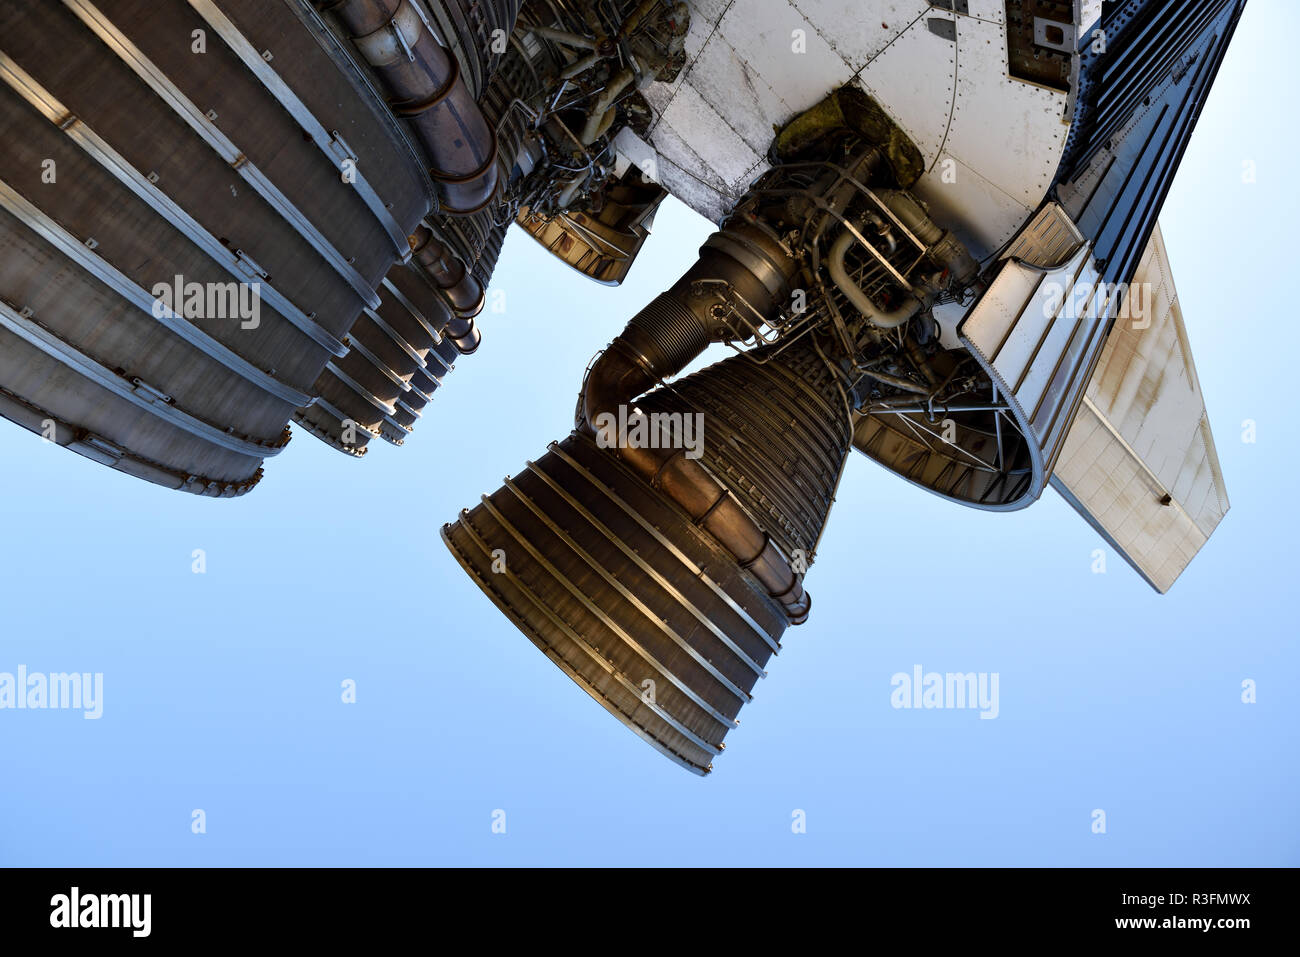 Apollo Saturn V booster rocket with large powerful liquid oxygen fueled rocket engines Stock Photo